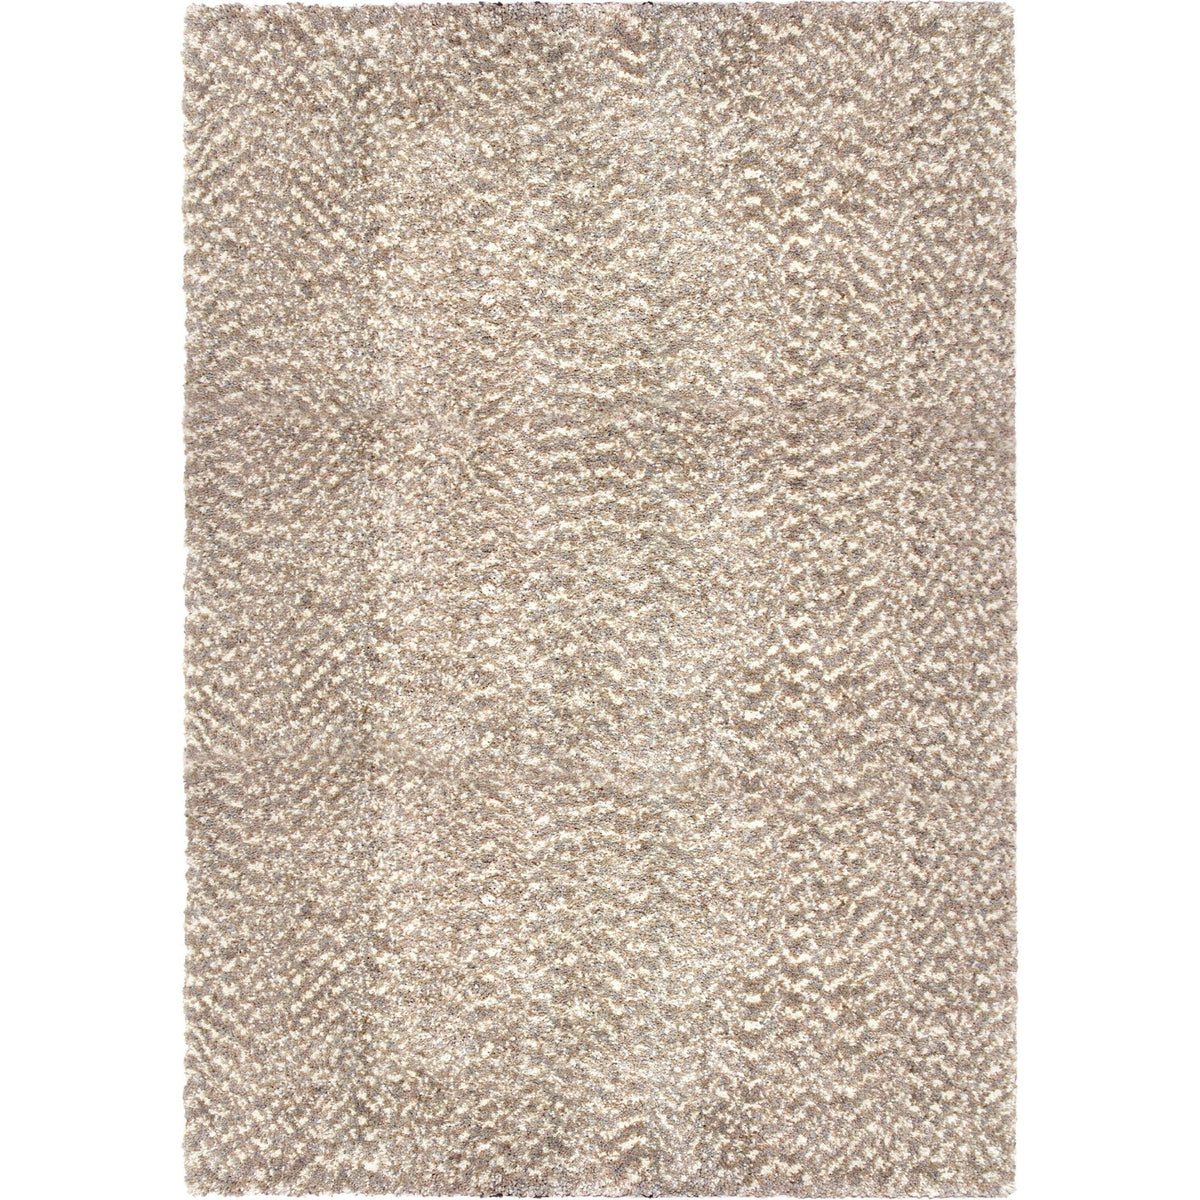 Cotton Tail 8300 Solid Beige Rug - Rug & Home